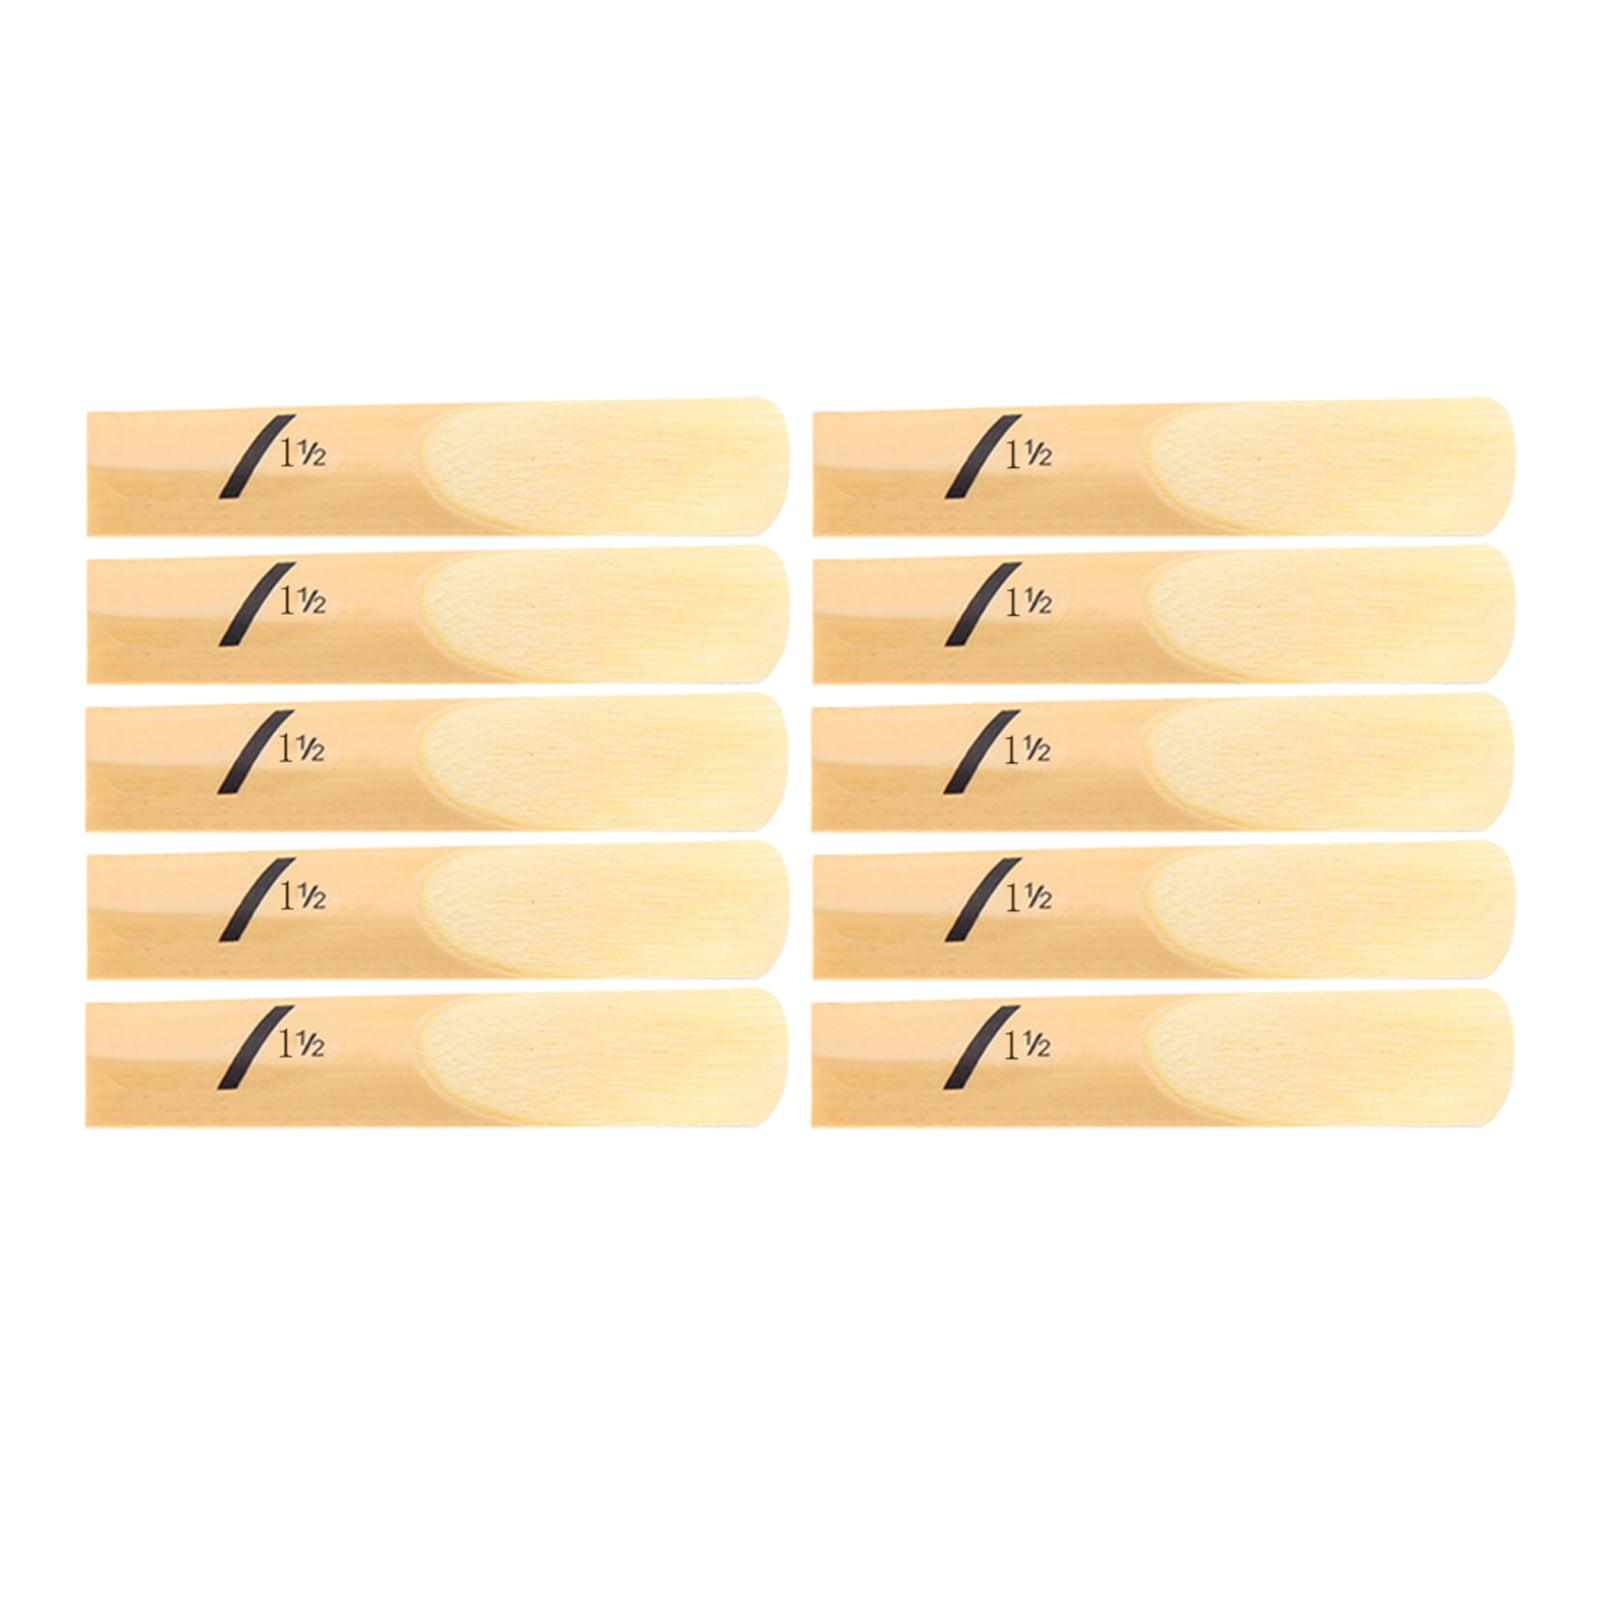 GEZICHTA Tenor Saxophone Reed 10pcs BB Gold Home for Beginners Hardness 1.5-4.0 Lightweight Professional Replacement Parts Durable Woodwind Instrument Portable Accessories 1.5 